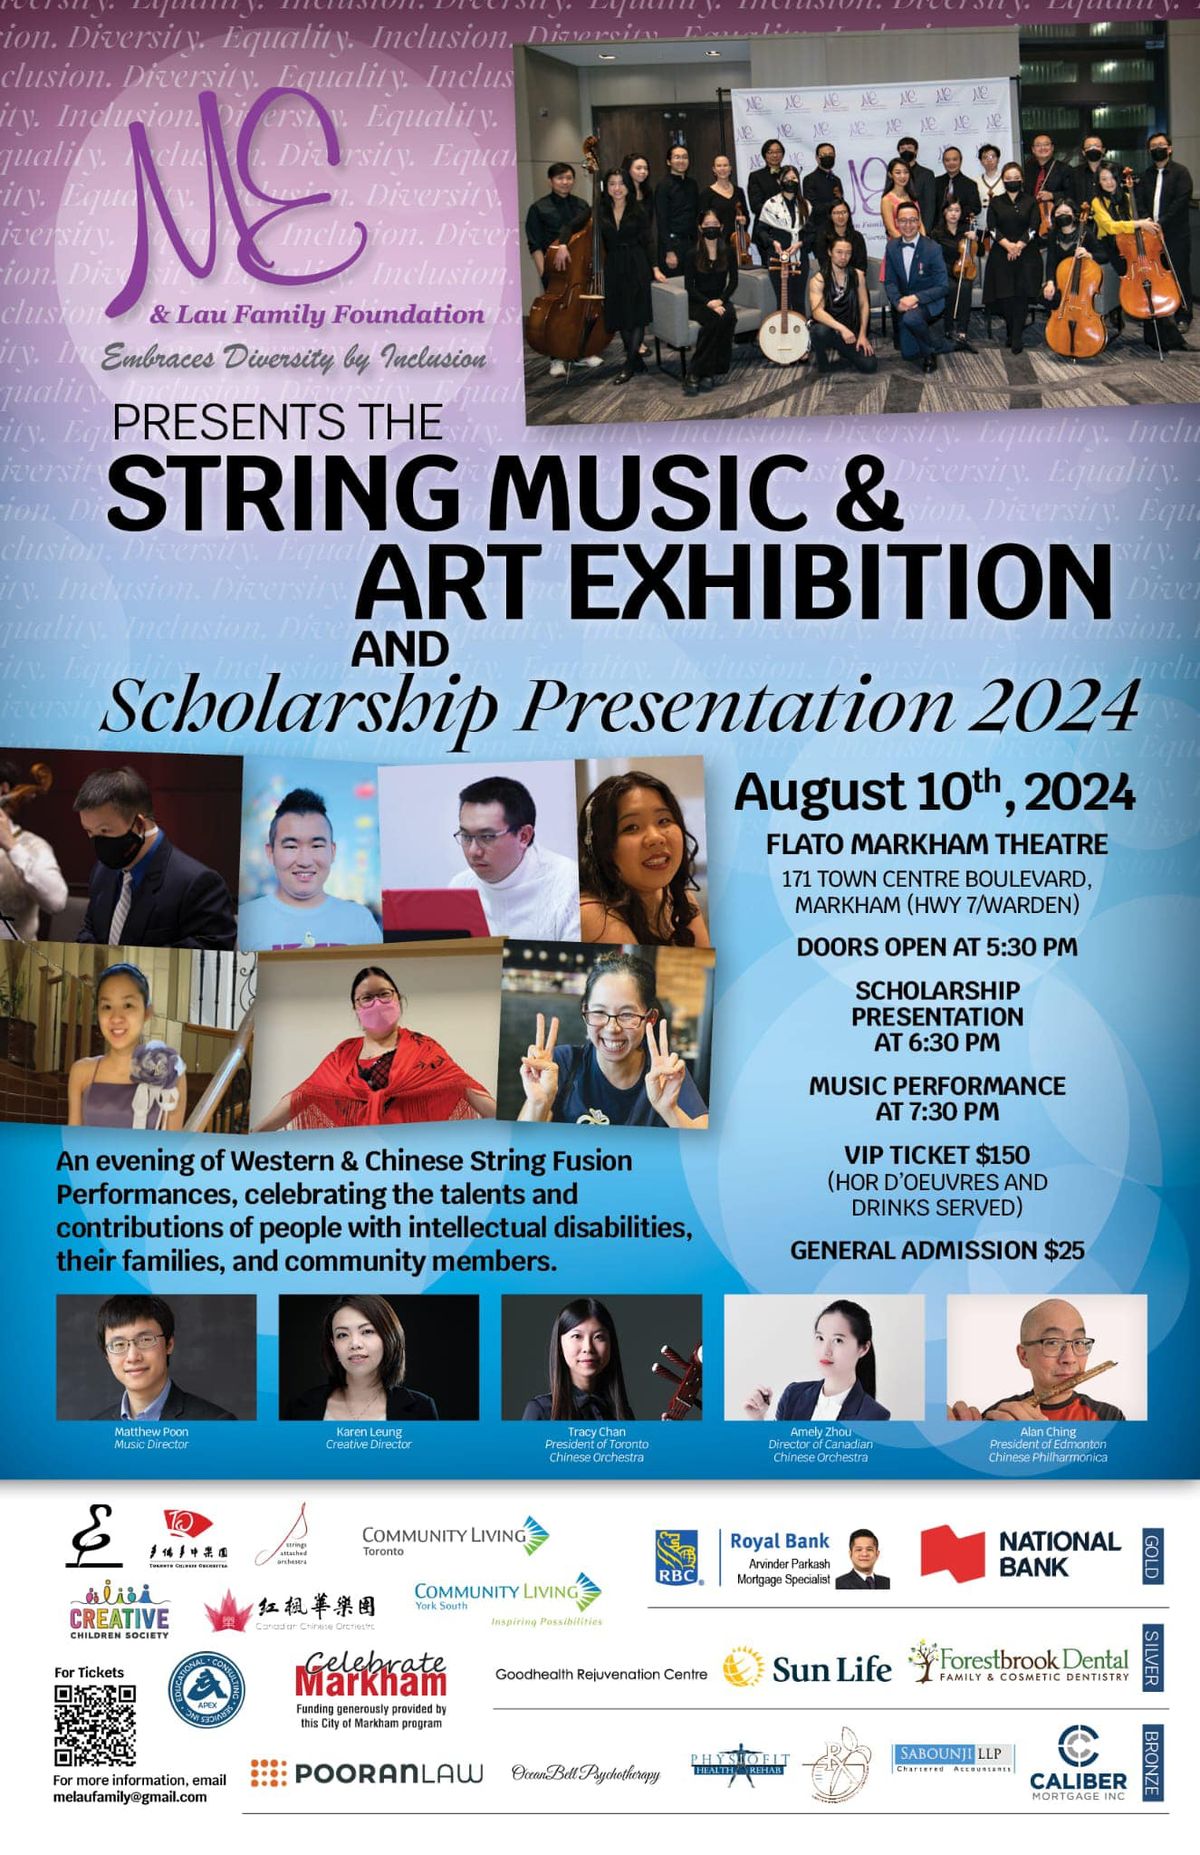 The 2024 String Music Art Exhibition & the ME & Lau Family Foundation Scholarship Awards